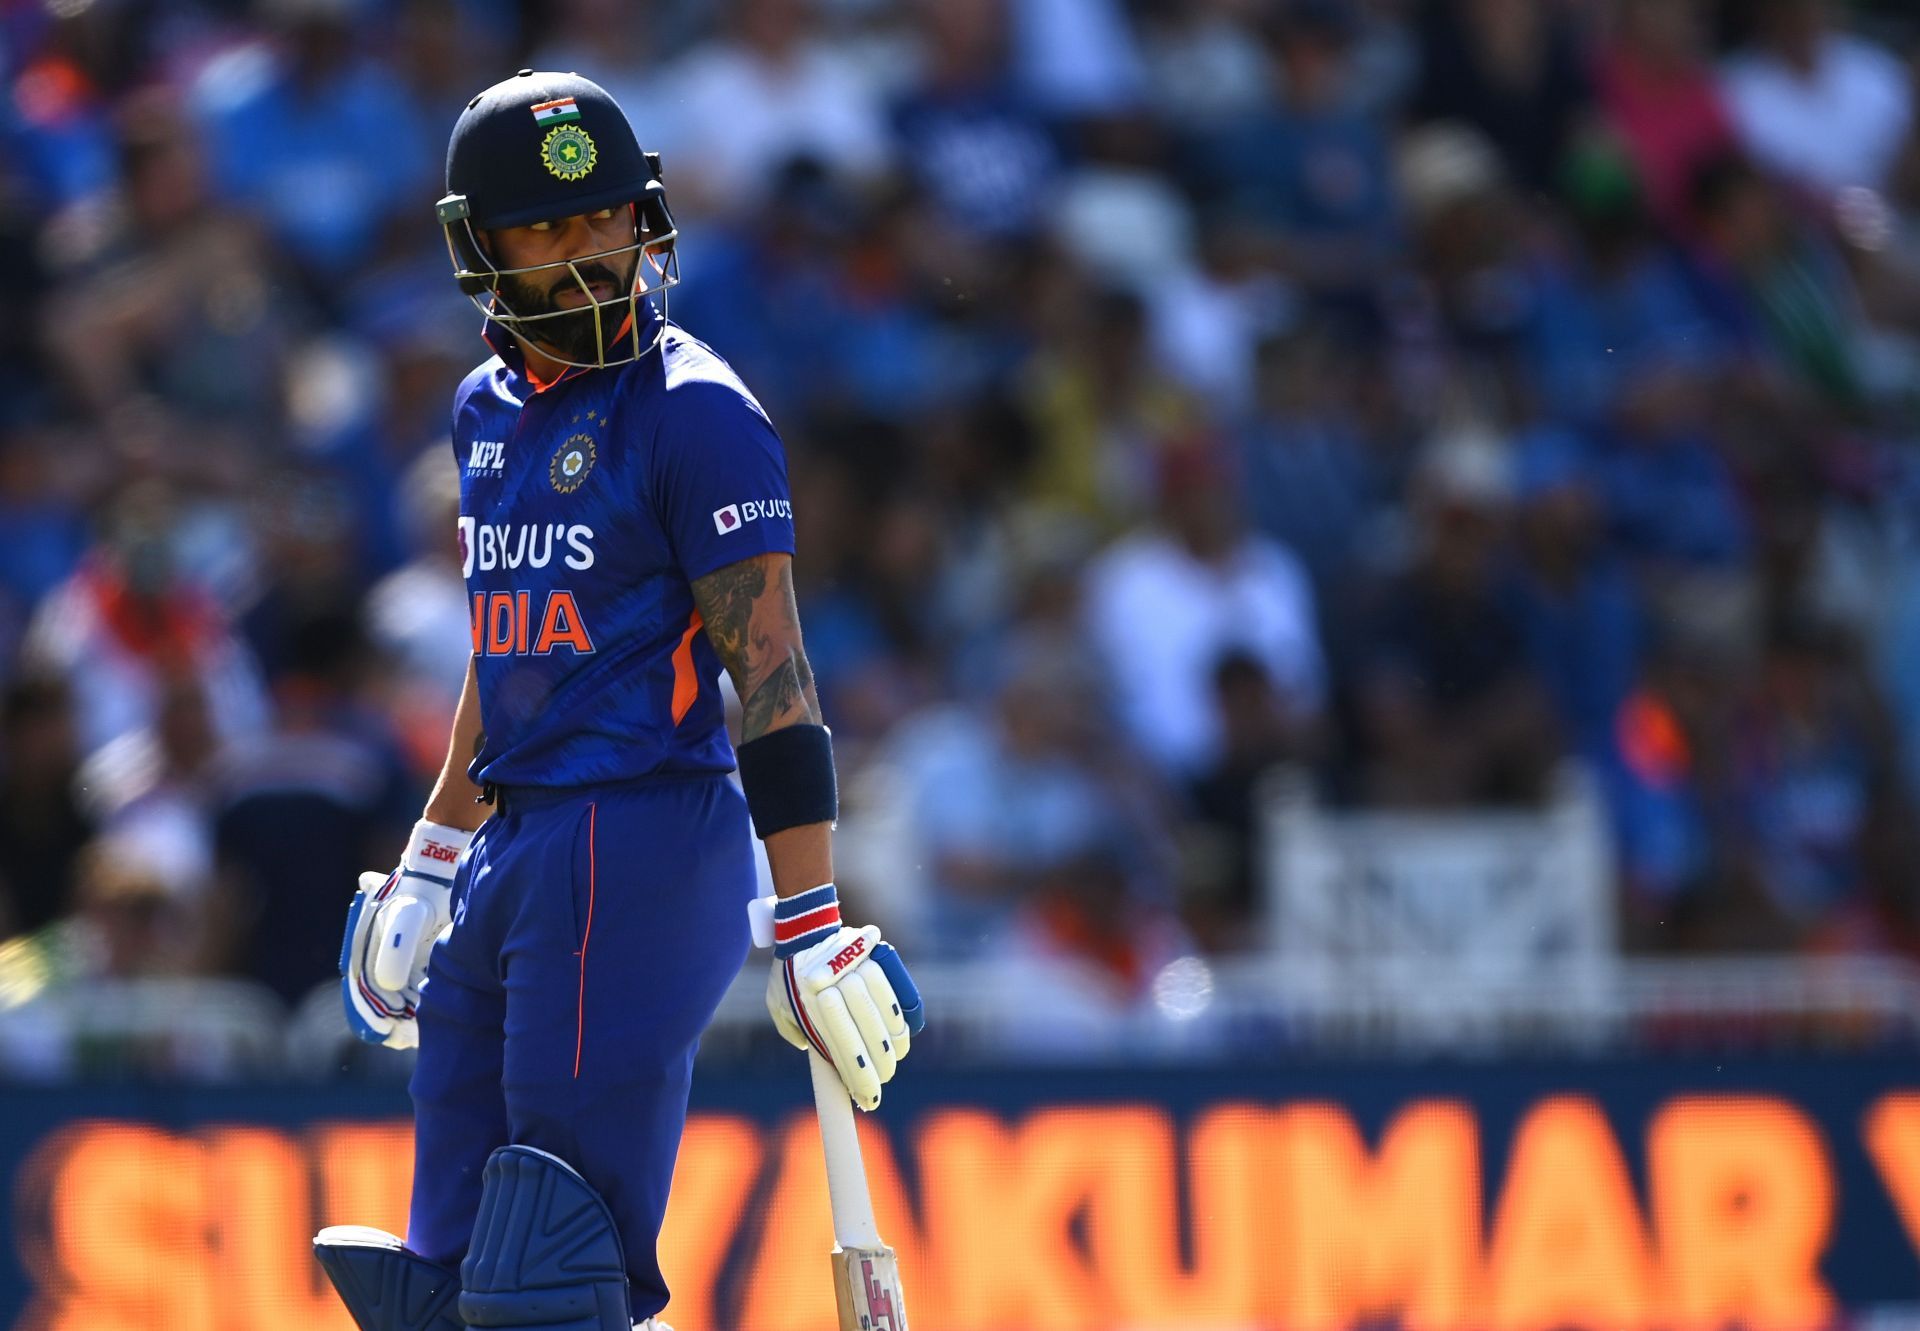 Virat Kohli has not been in great form in recent times